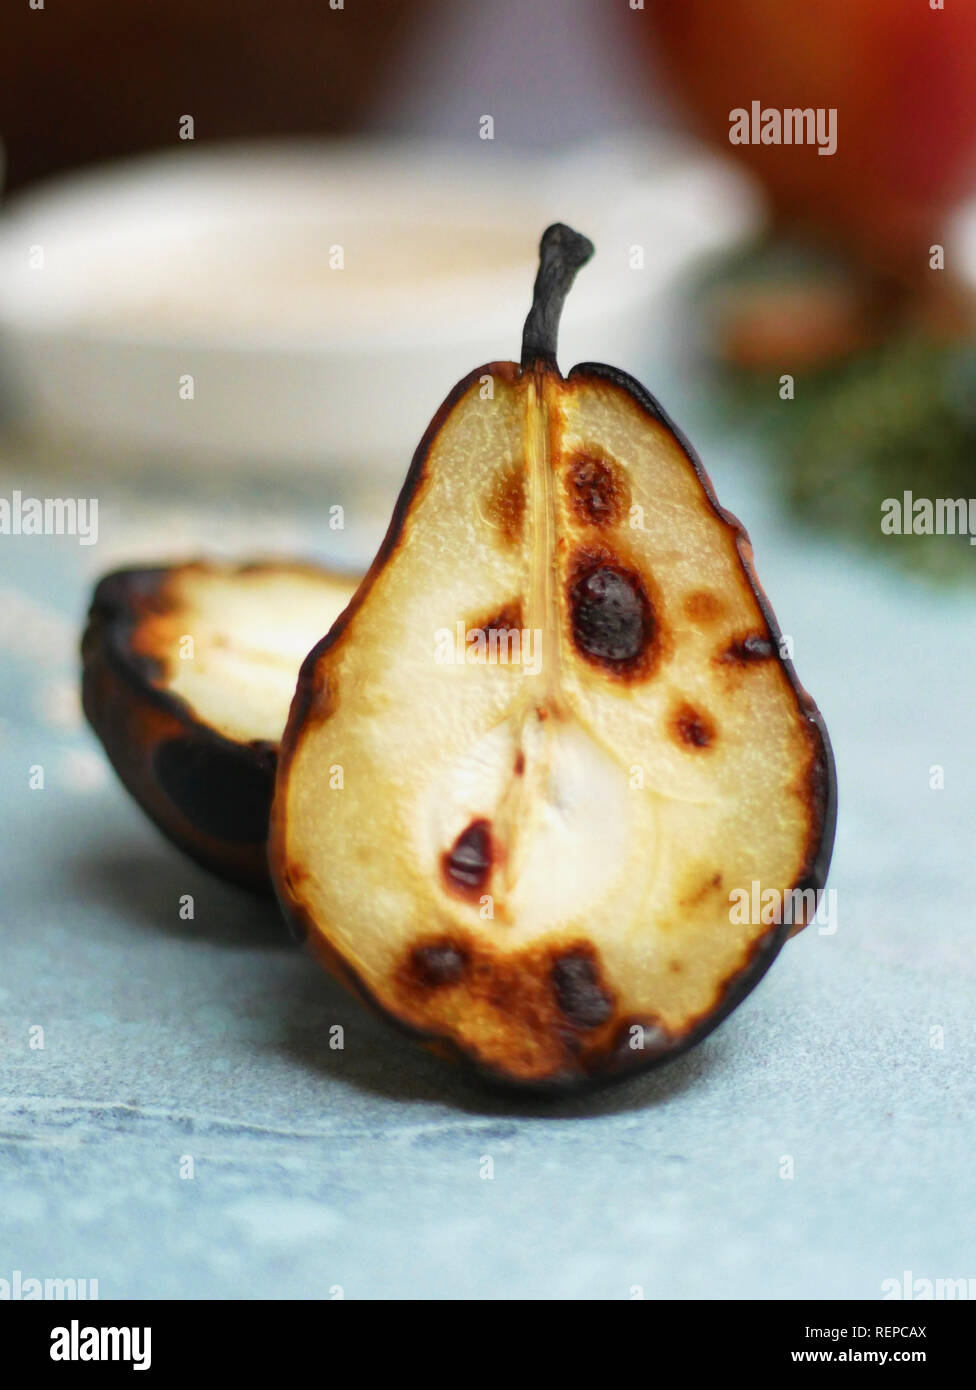 a detail image of a roasted, charred pear Stock Photo